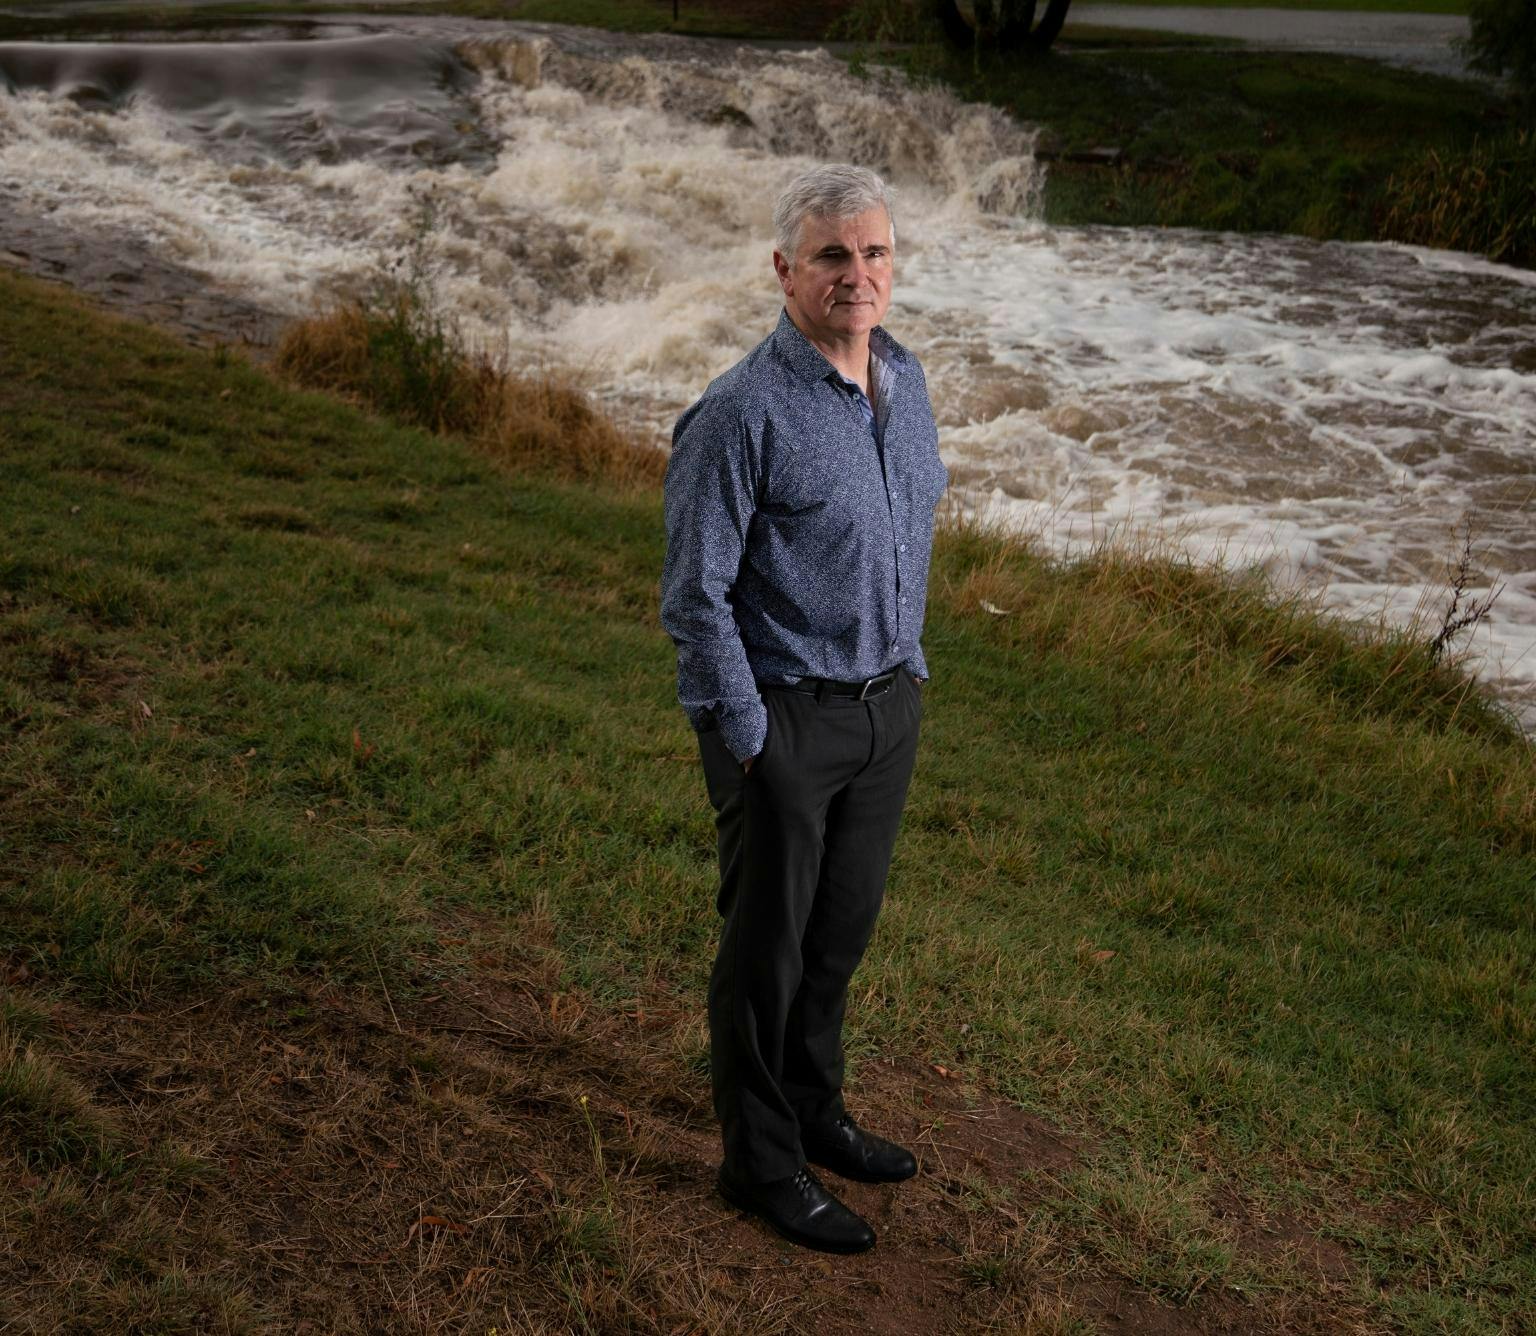 Mark Howden is wearing a blue collared shirt and black pants. He is standing on a grass bank and behind him is a river way. with frothy white-brown water flowing through